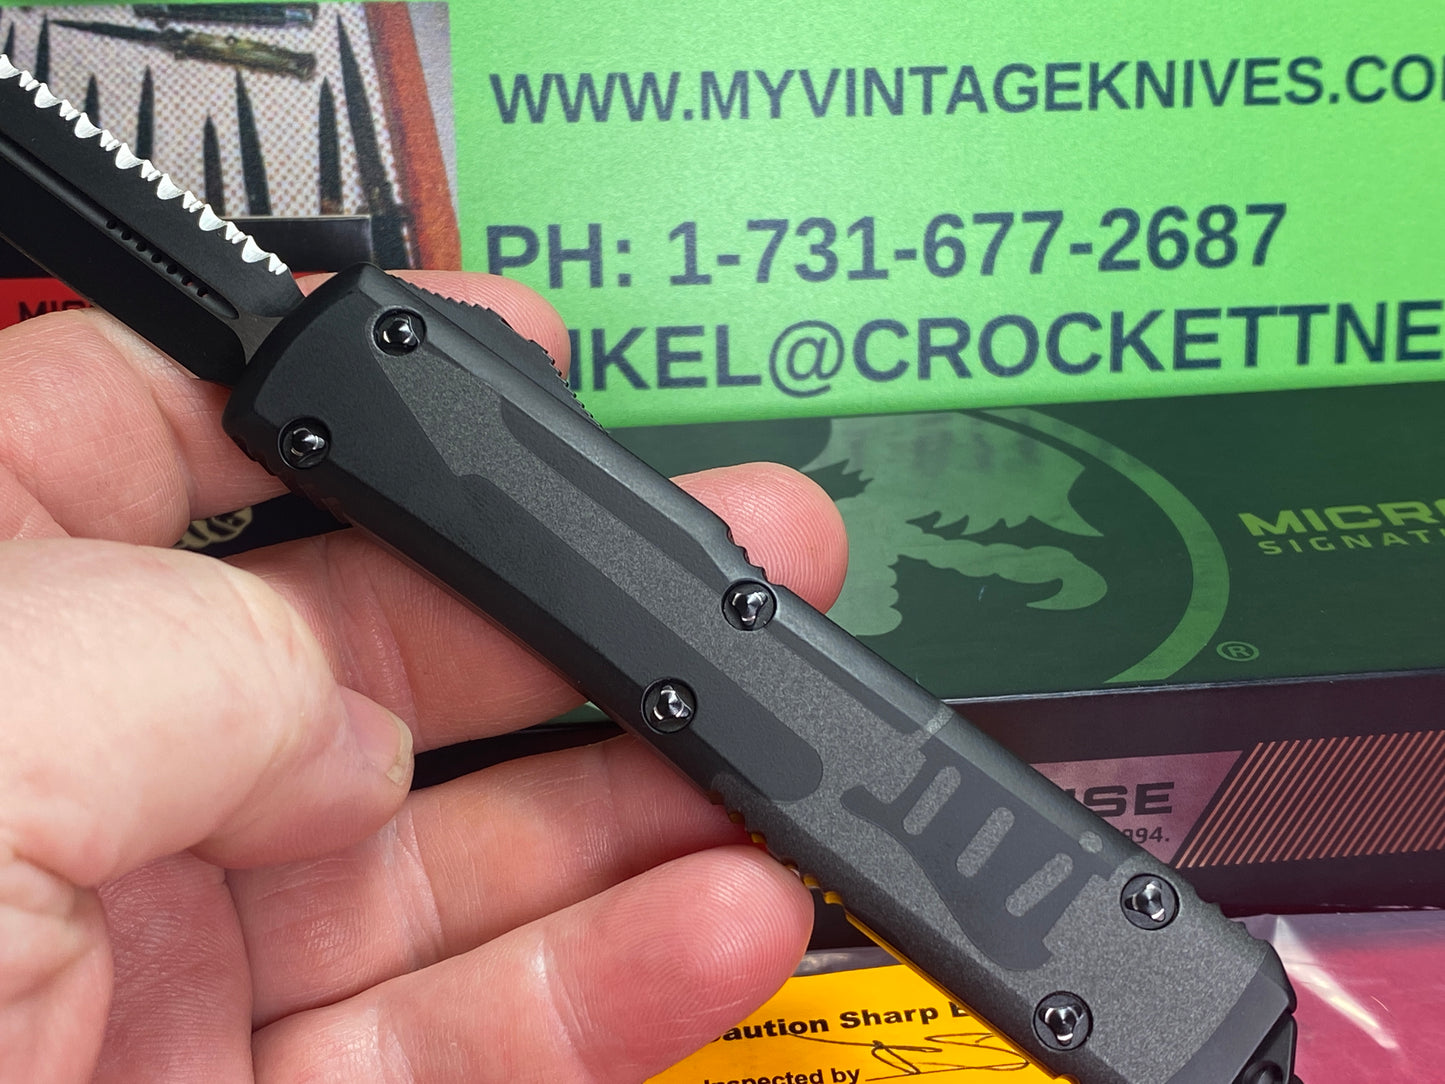 MICROTECH ULTRATECH D/E OTF 05/2021 NCKS 122-3 NCKSTS EXCLUSIVE SIGNATURE SERIES TACTICAL FULL SERRATTED RINGED HARDWARE S/N 007 BLACK TACTICAL HANDLES ETCHED BLACK GUITAR